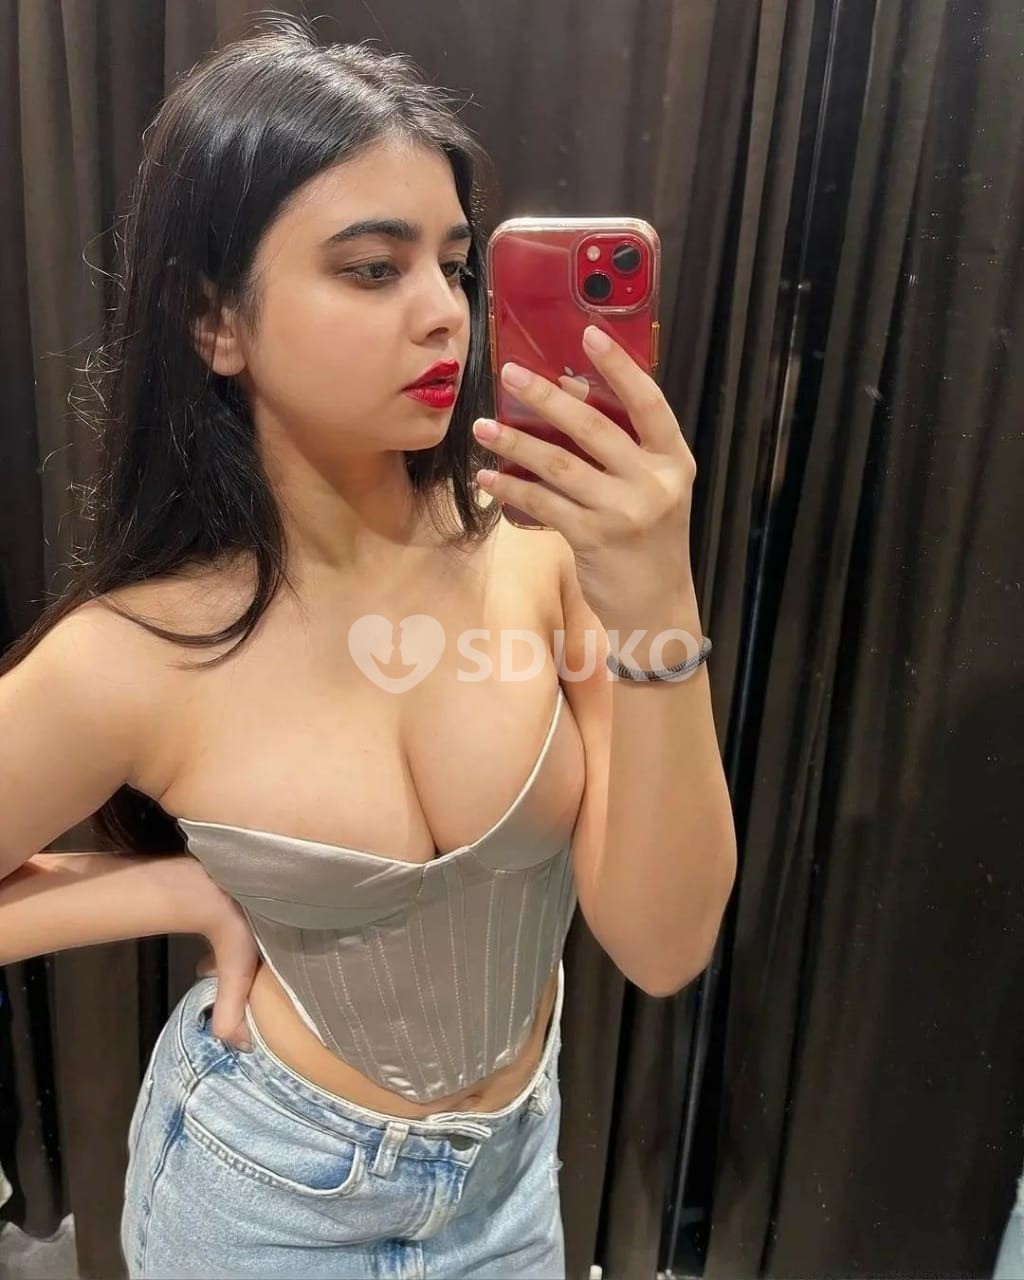 GHAZIABAD &VIP TODAY LOW PRICE ESCORT 🥰SERVICE 100% SAFE AND SECURE ANYTIME CALL ME 24 X 7 SERVICE AVAILABLE 100% SAF